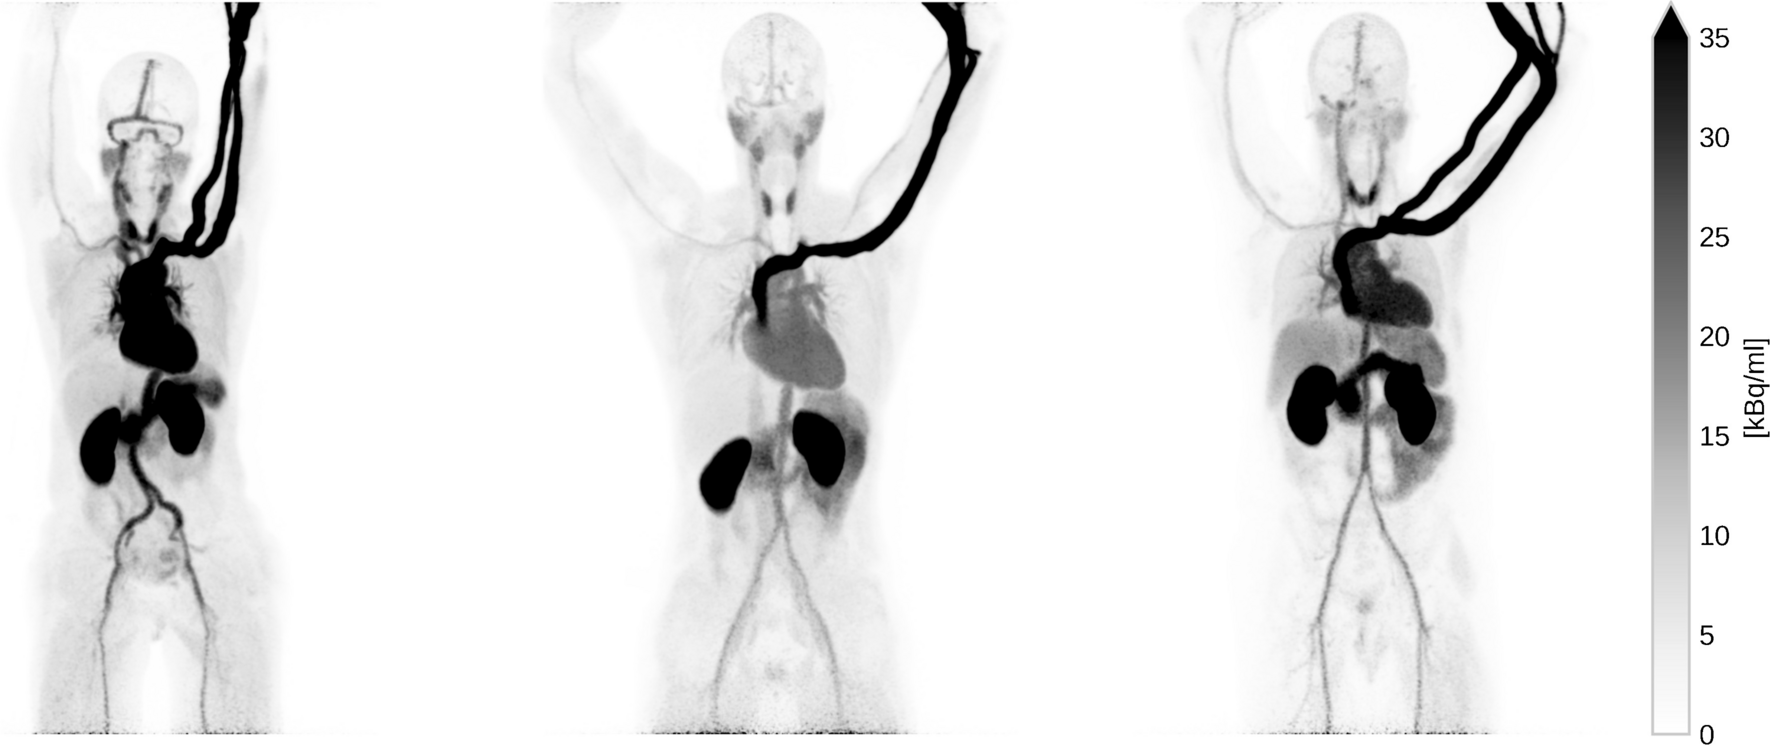 Nuclear medicine scans. Maximum intensity projection (MIP) of the three subjects at rest. The images depict the full scan integration